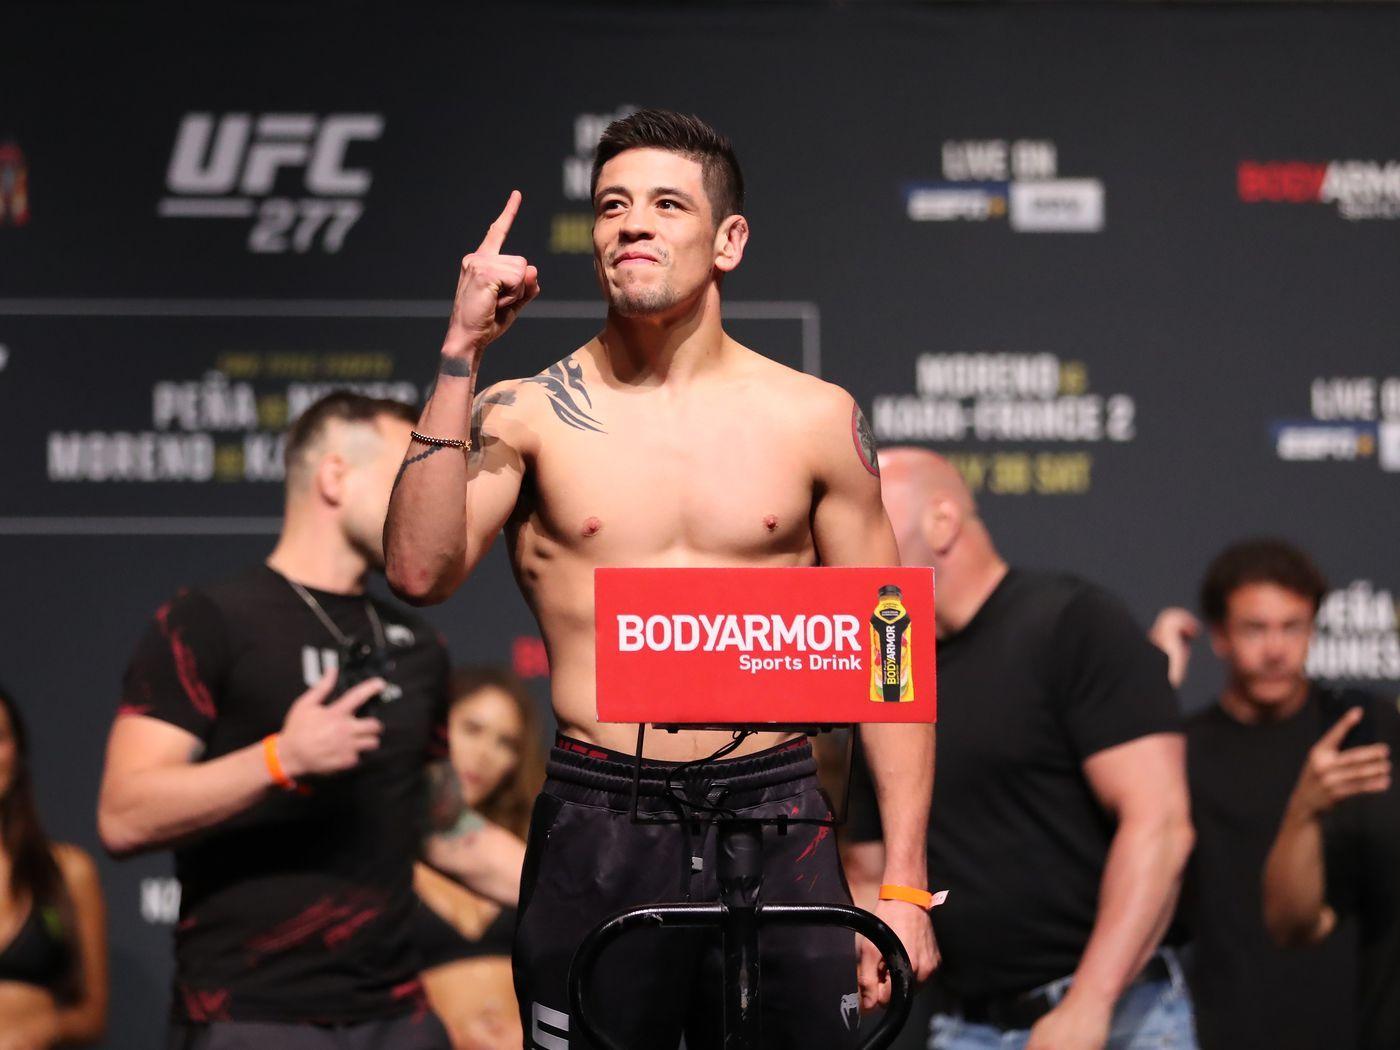 Brandon Moreno weighs in at UFC 277. Credit to: DraftKings Nation.